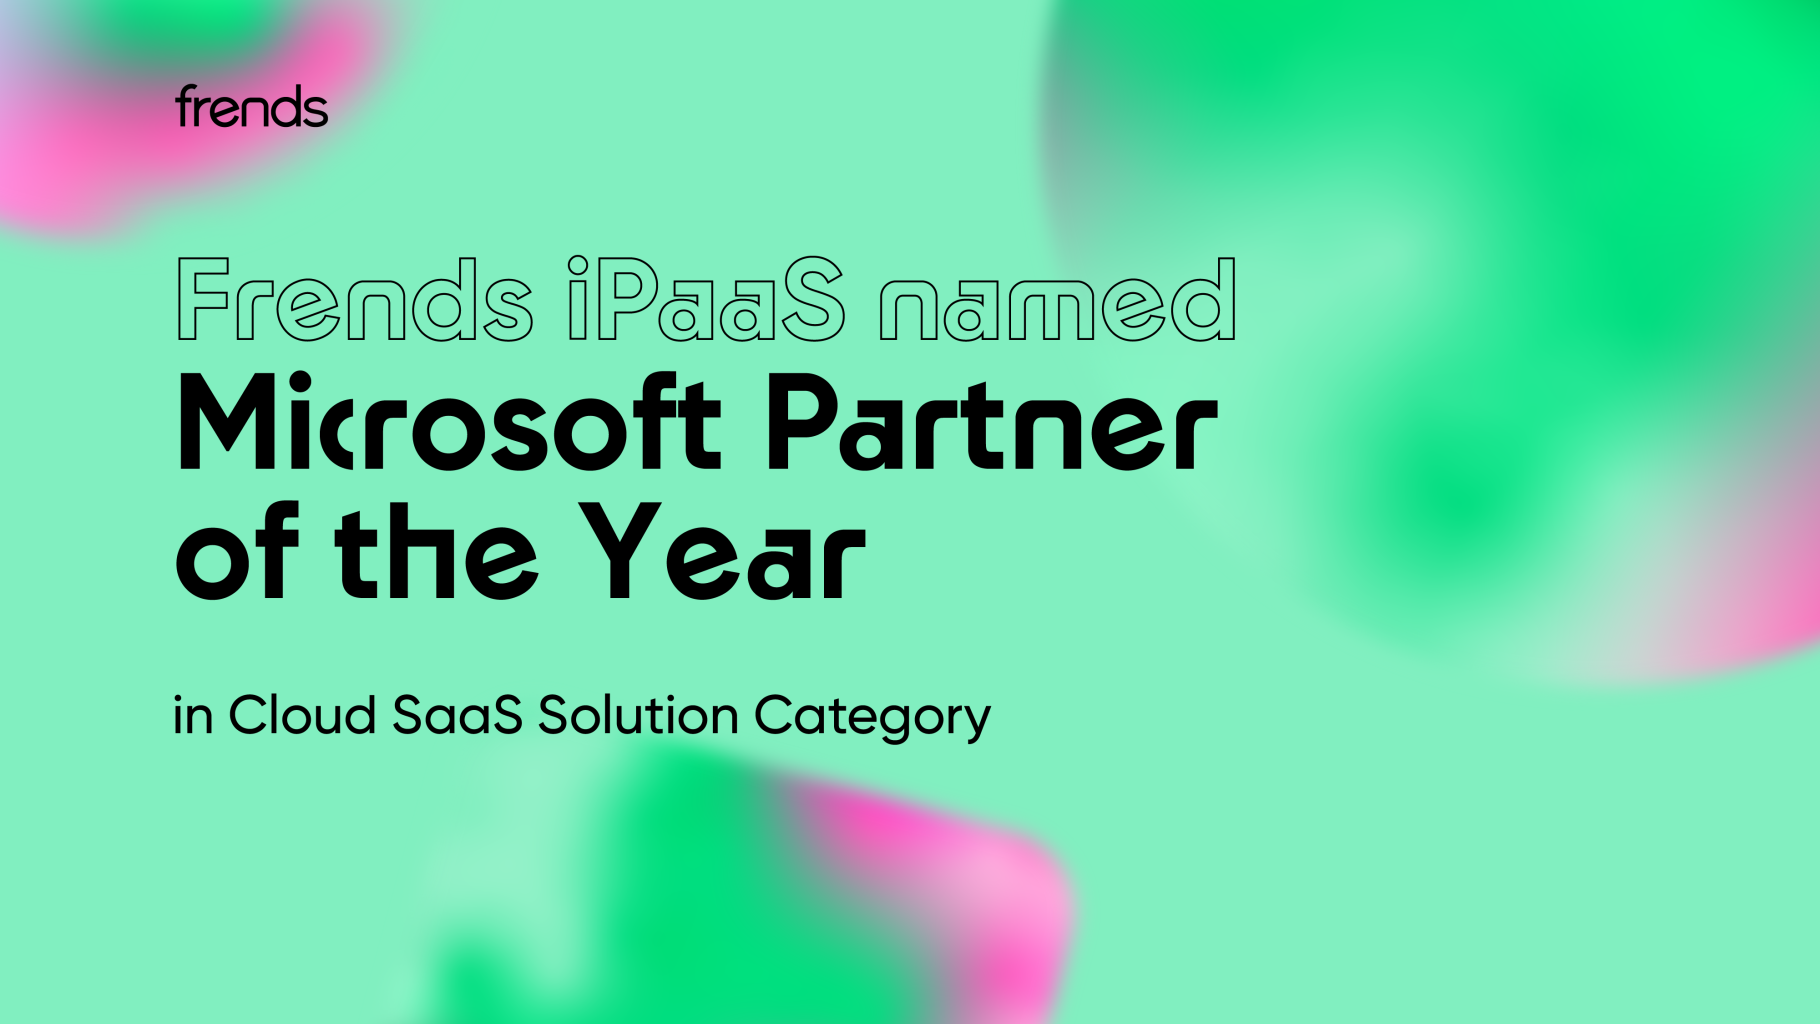 Frends named Microsoft Partner of the Year in Cloud SaaS Solution category